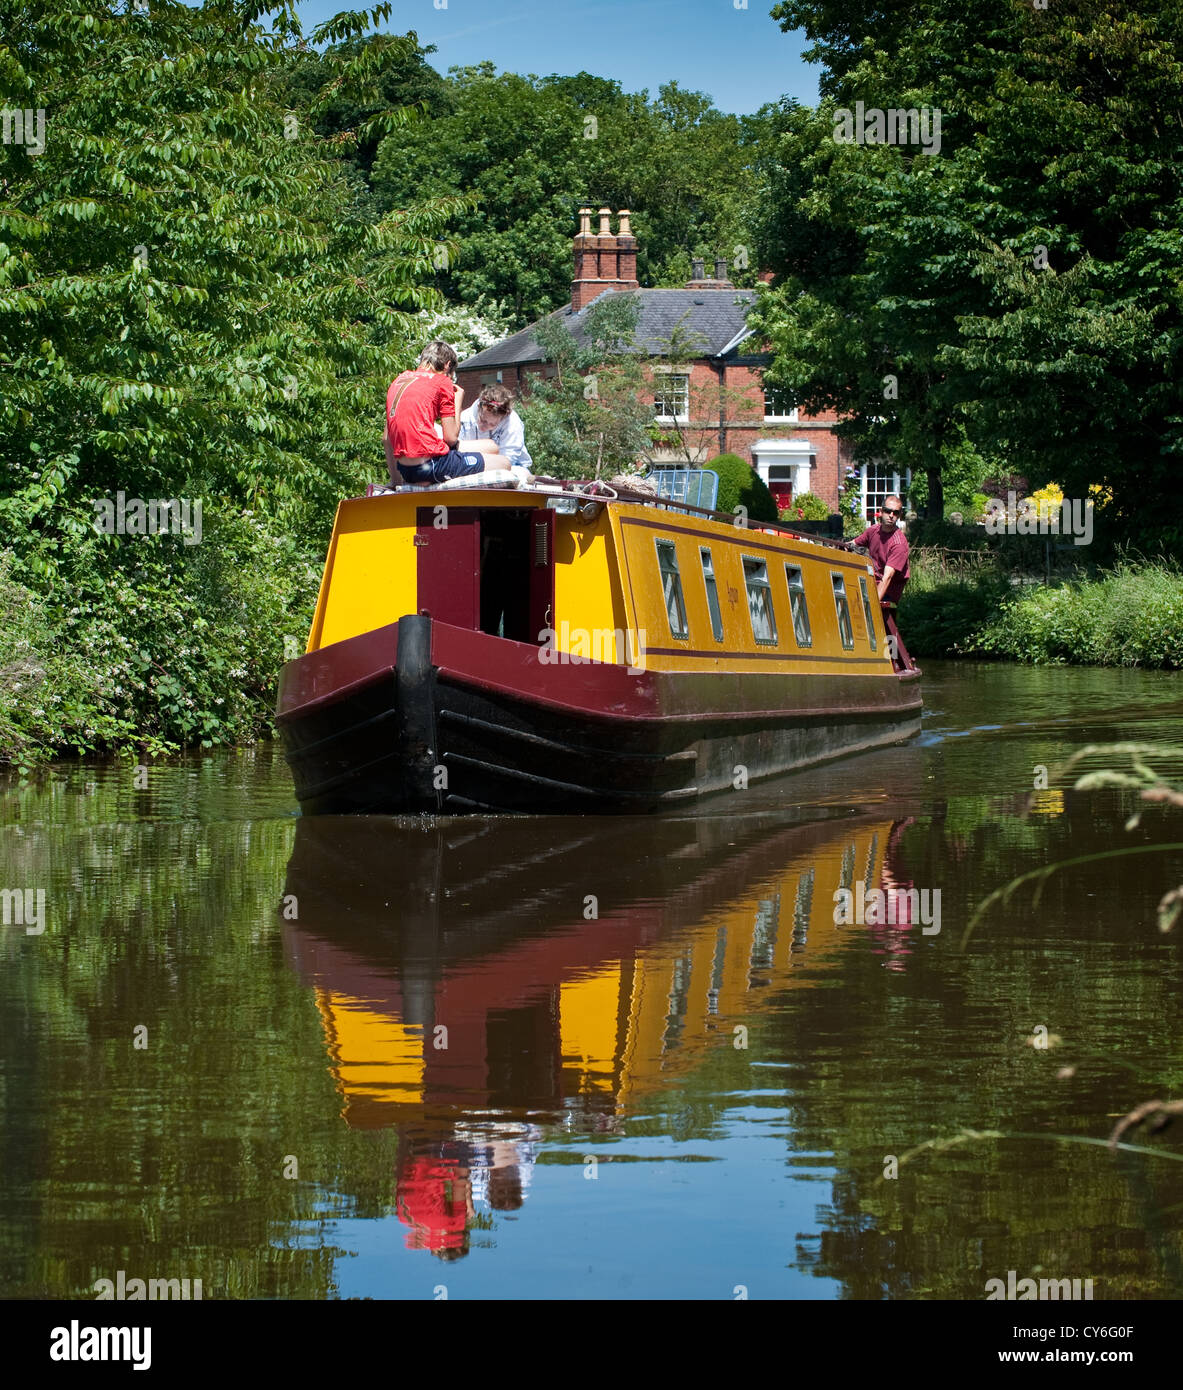 Canal boat and Poacher's Pocket Pub on the Llangollen Canal, shropshire, England Stock Photo